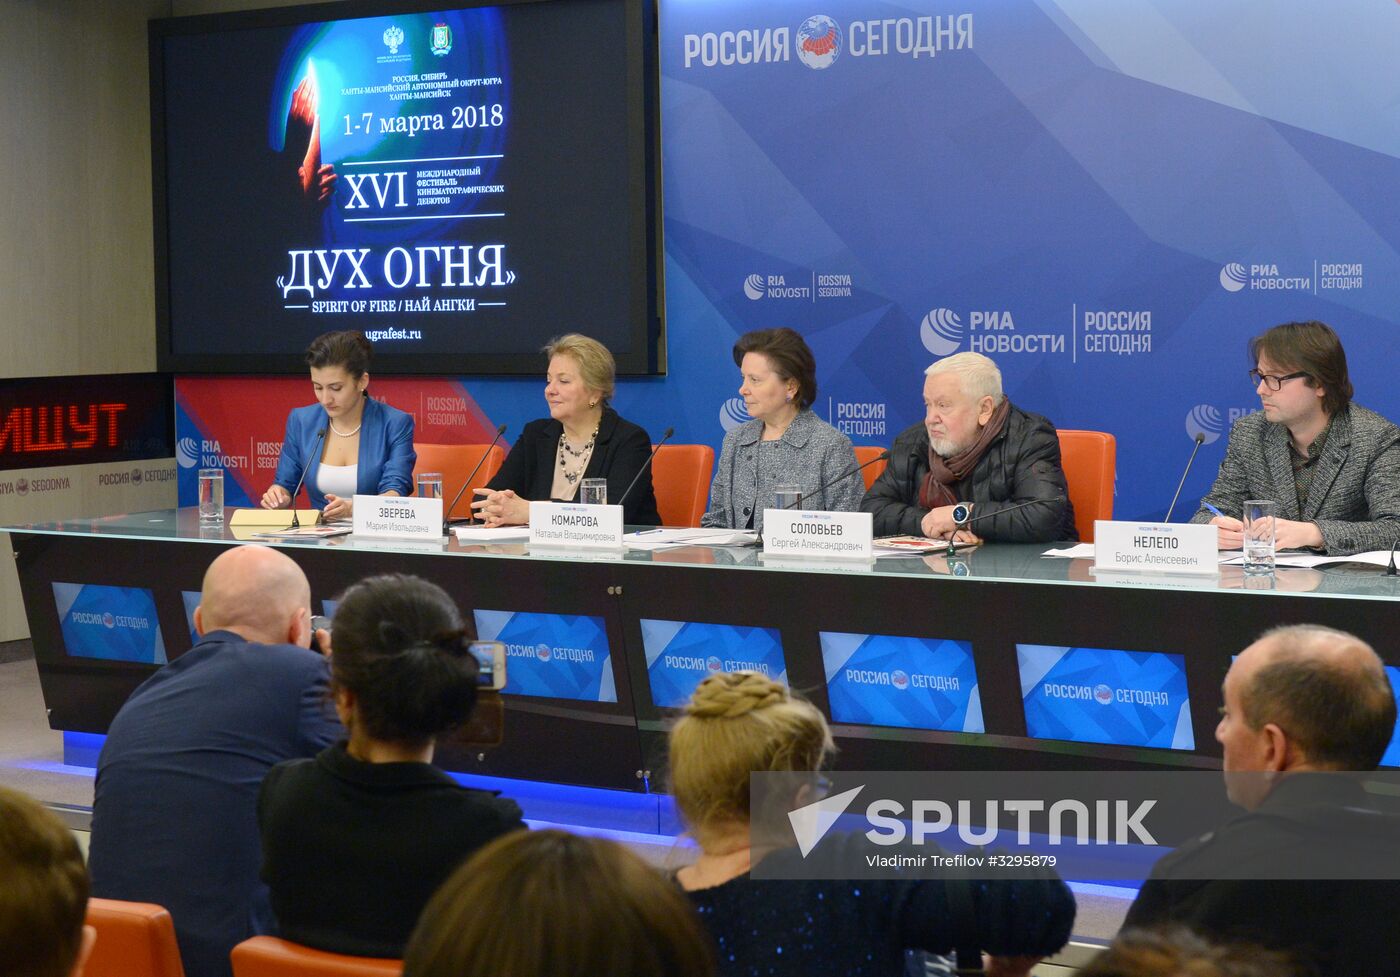 News conference on 16th Spirit of Fire international debut film festival